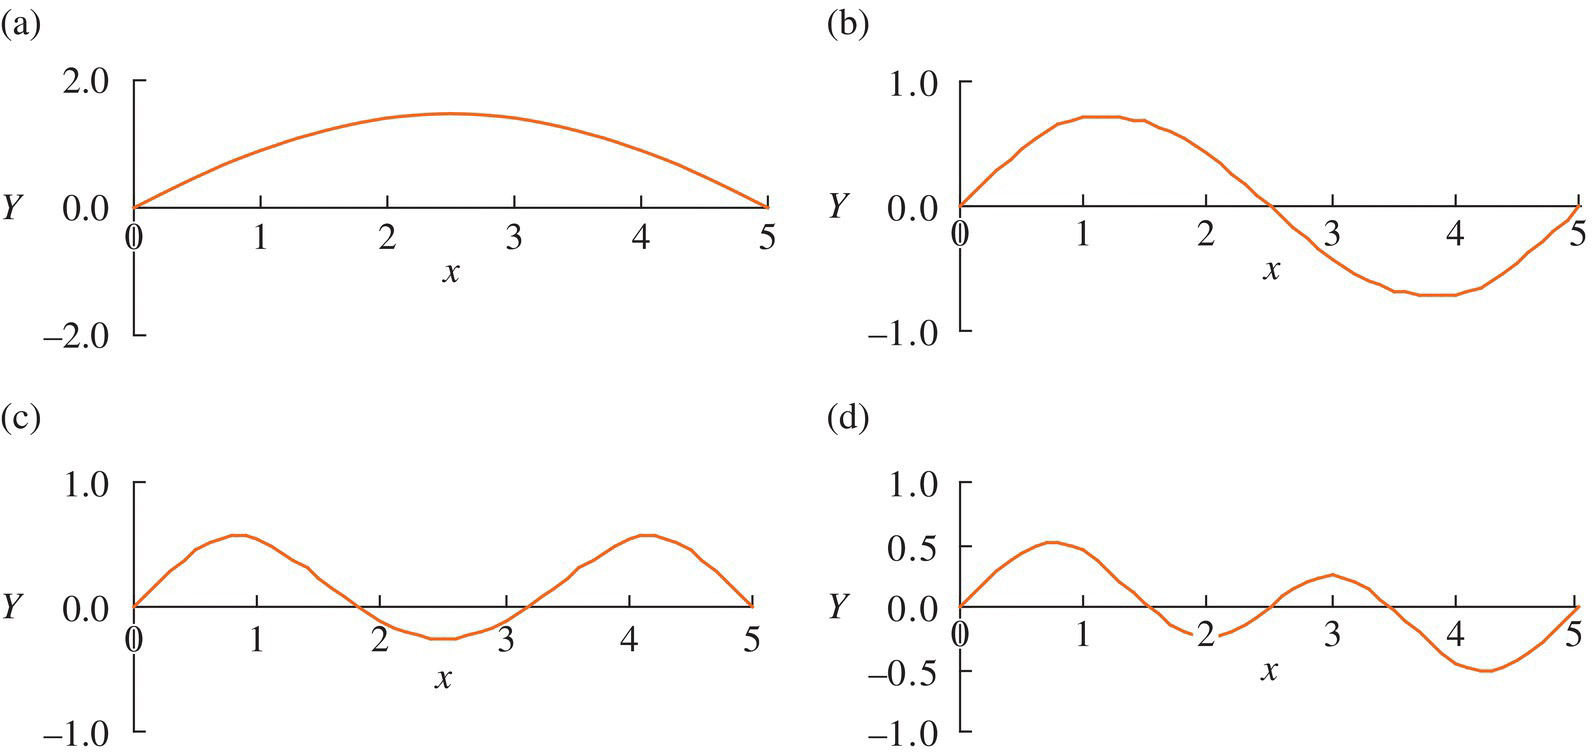 4 Graphs, each displaying a curve, illustrating the first-order (top left), second-order (top right), third-order (bottom left), and fourth-order eigenvectors (bottom right) of a simply-simply supported system.